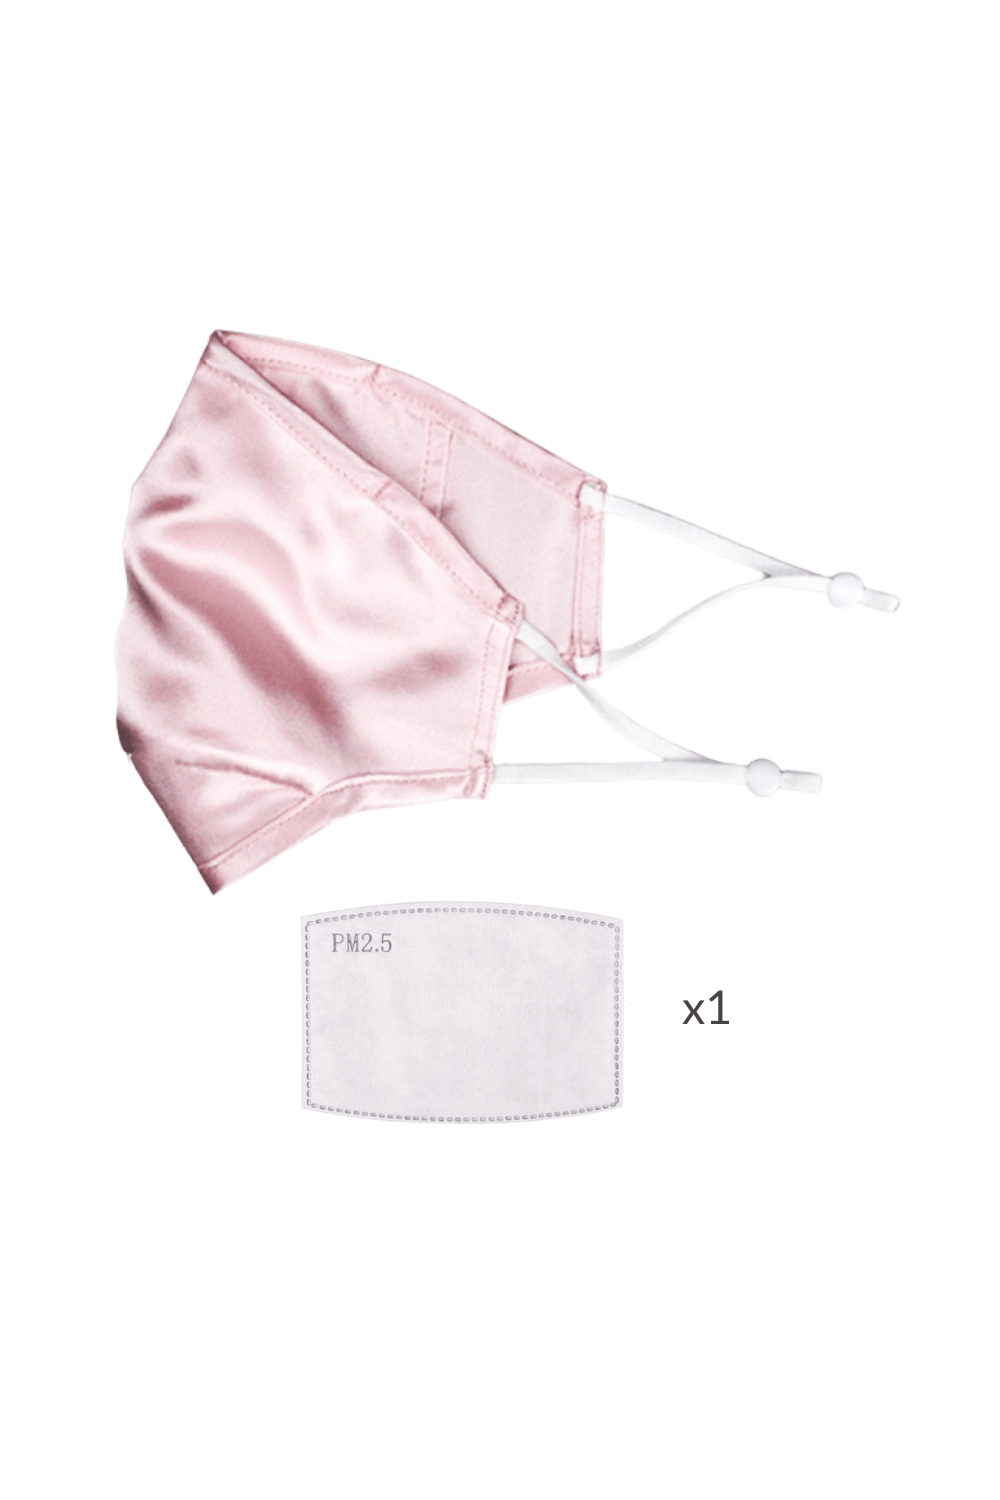 ULTRA Silk Face Mask - Pink (with Filter Pocket and Nose Wire) - BASK ™